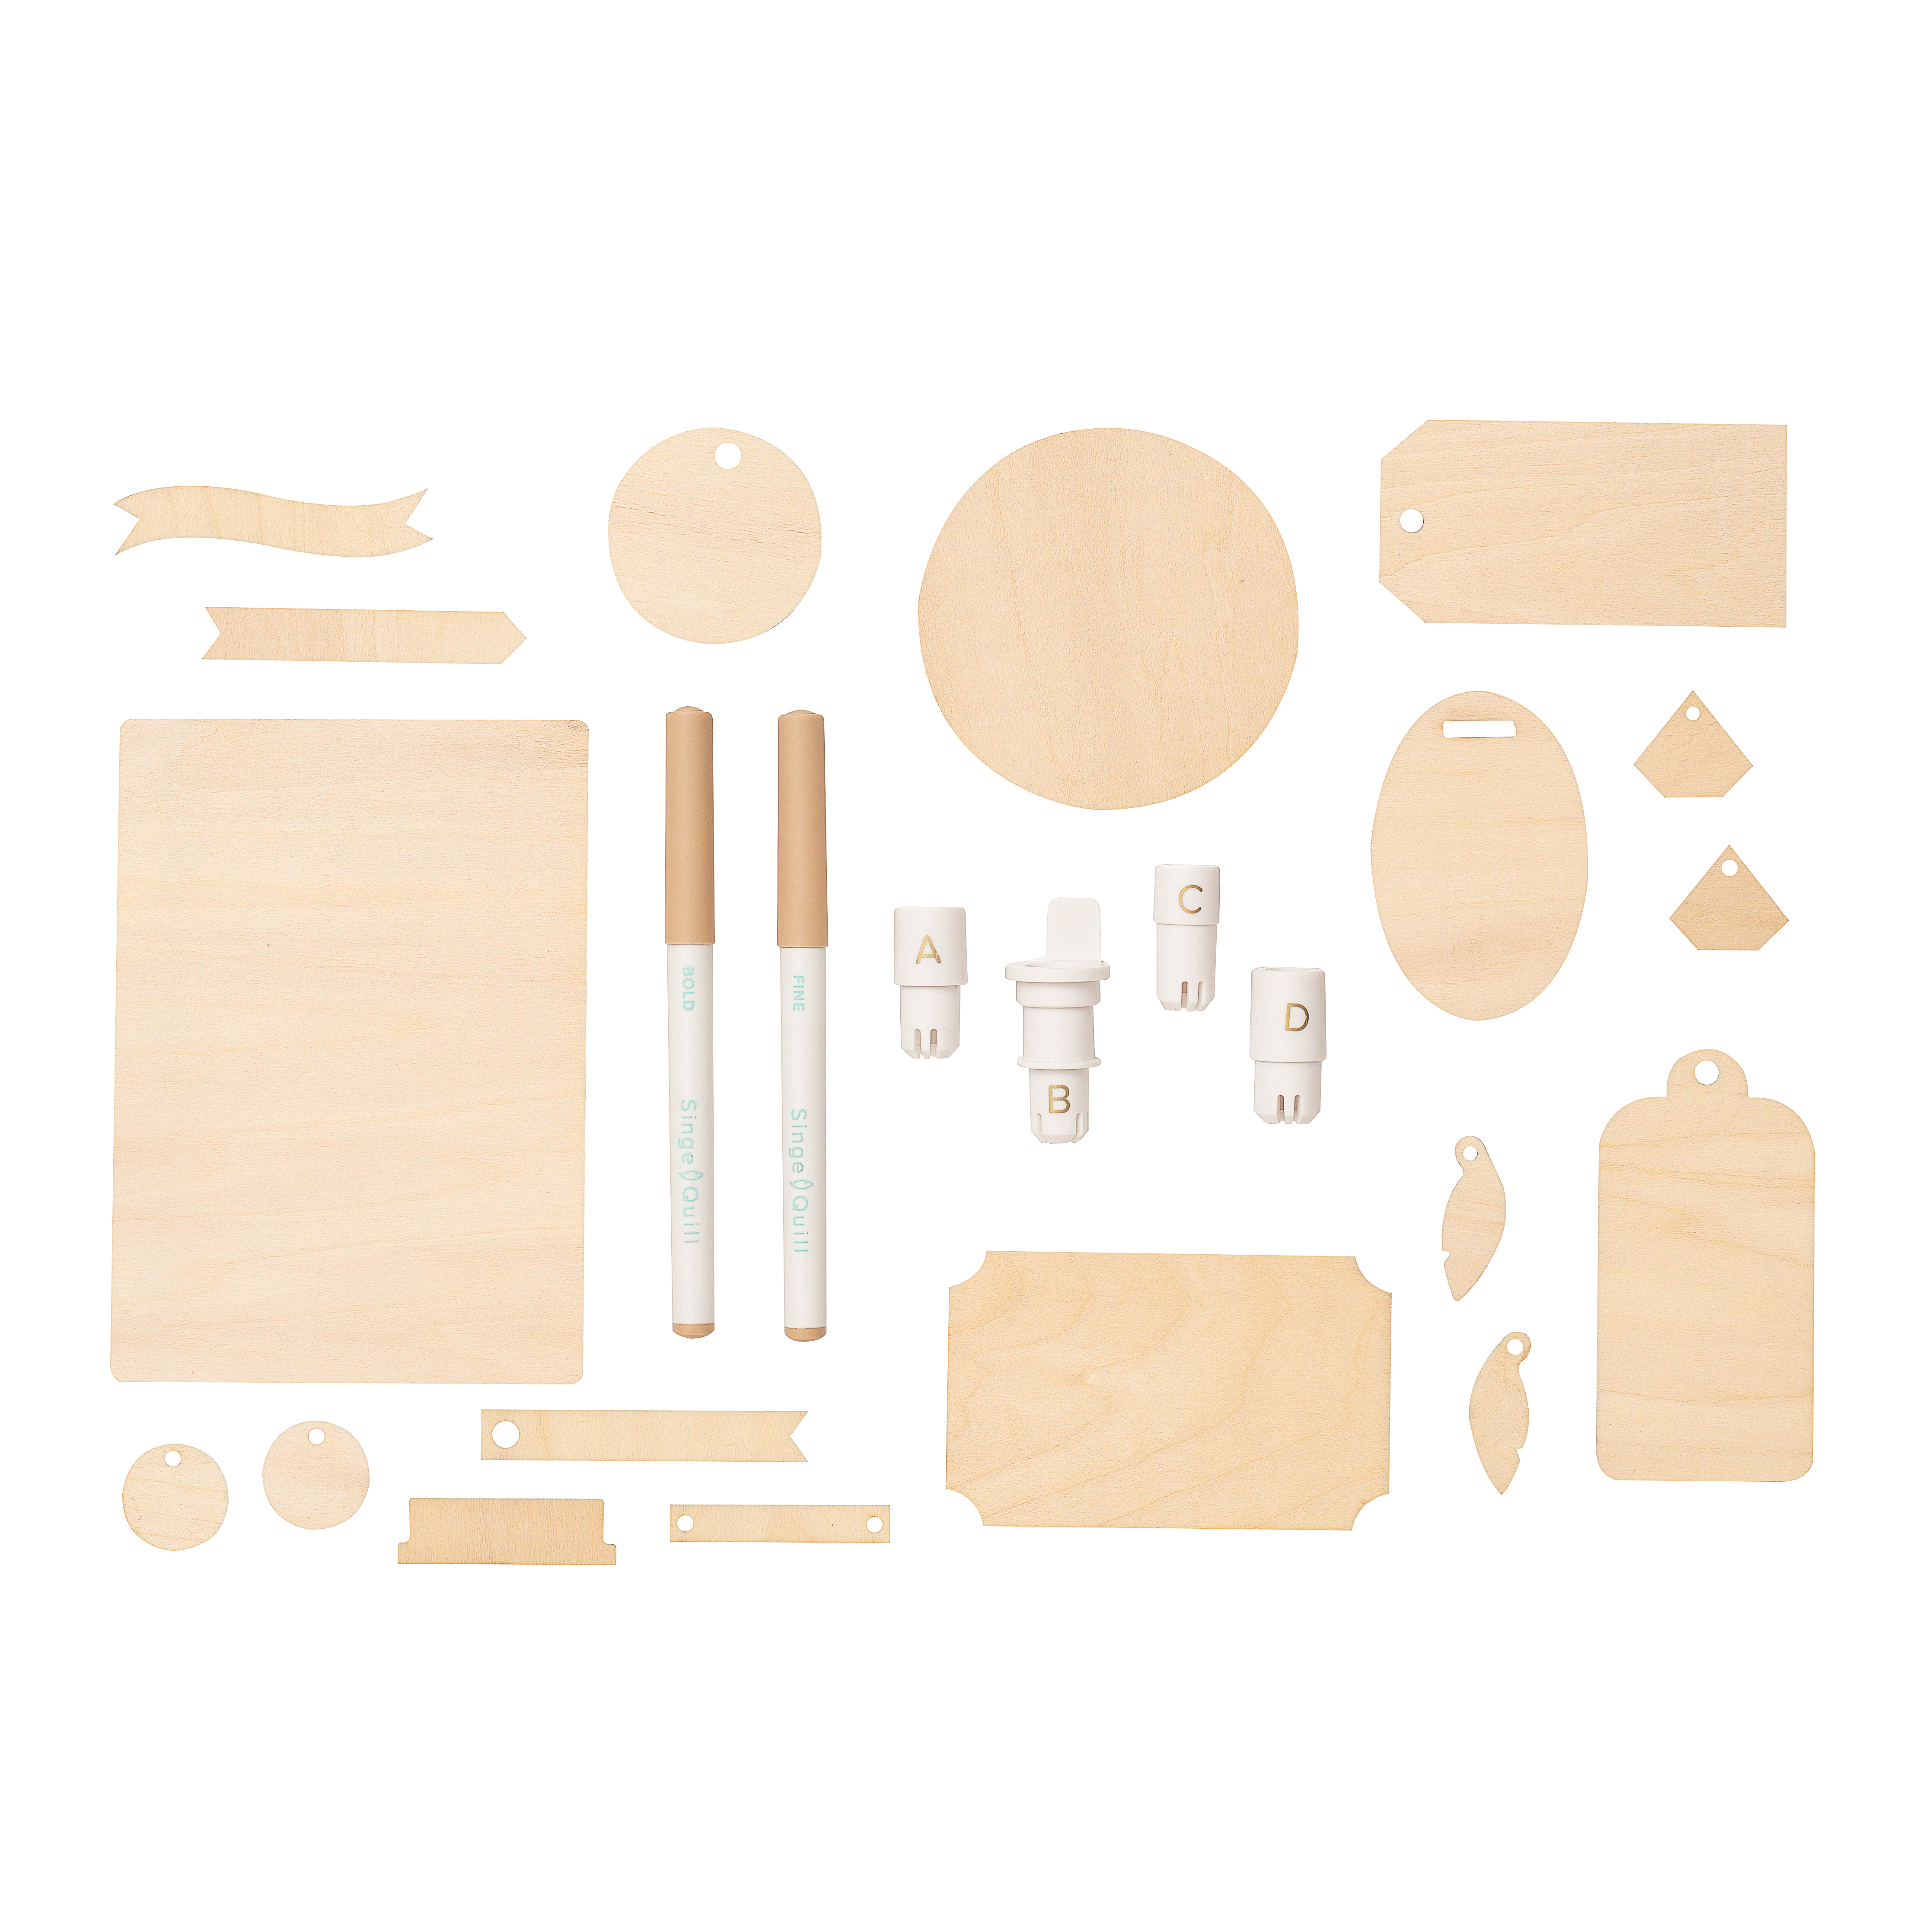 We R Makers • Quill singe quill starter kit 24 piece